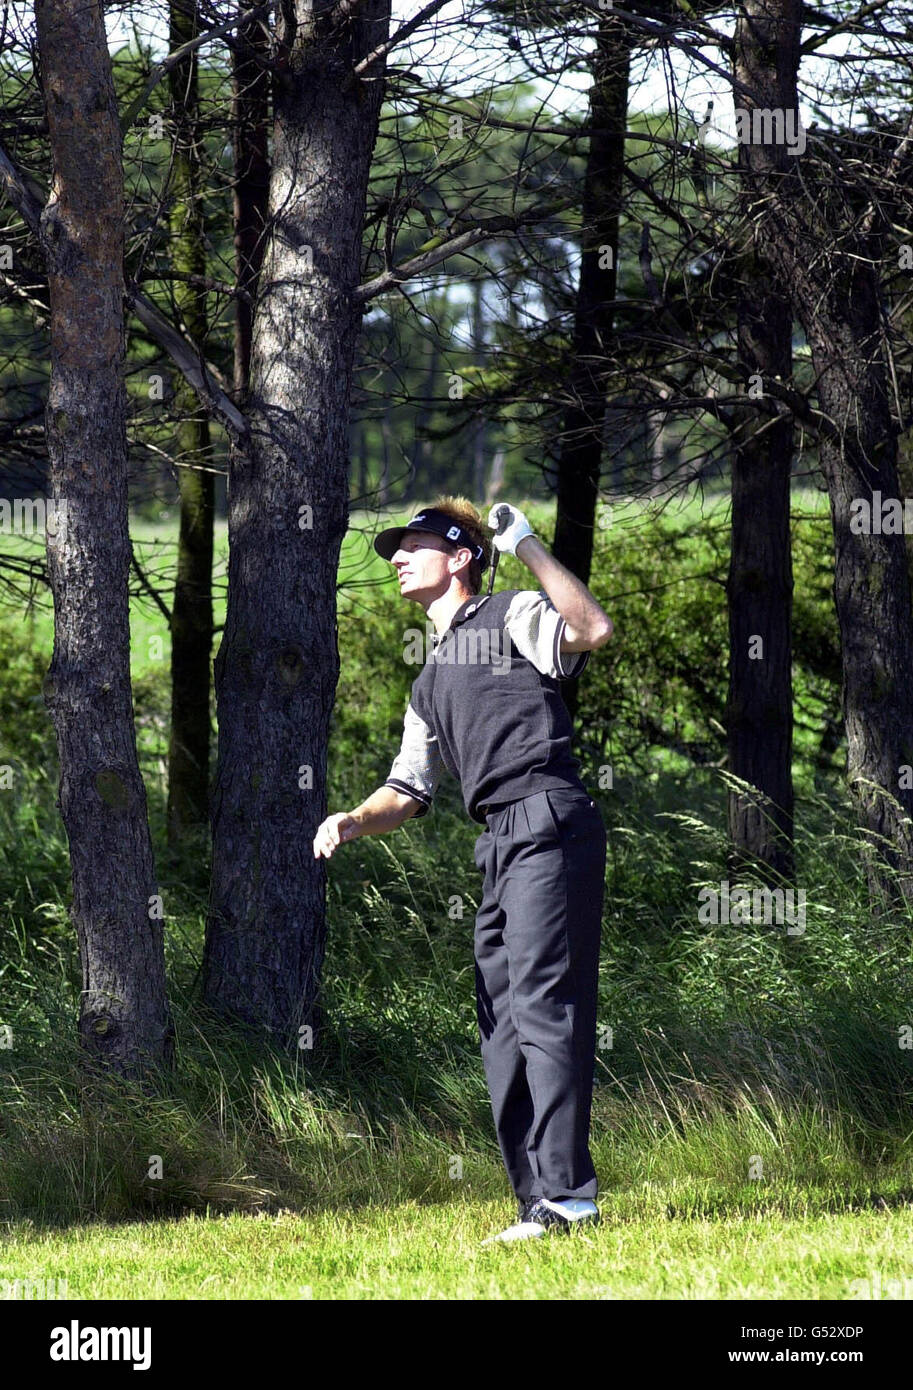 American Ryder Cup golfer Brad Faxon in the rough at Lundin Golf Club, near St. Andrews in Scotland. Faxon is playing in the Open pre-qualifying competition. Stock Photo